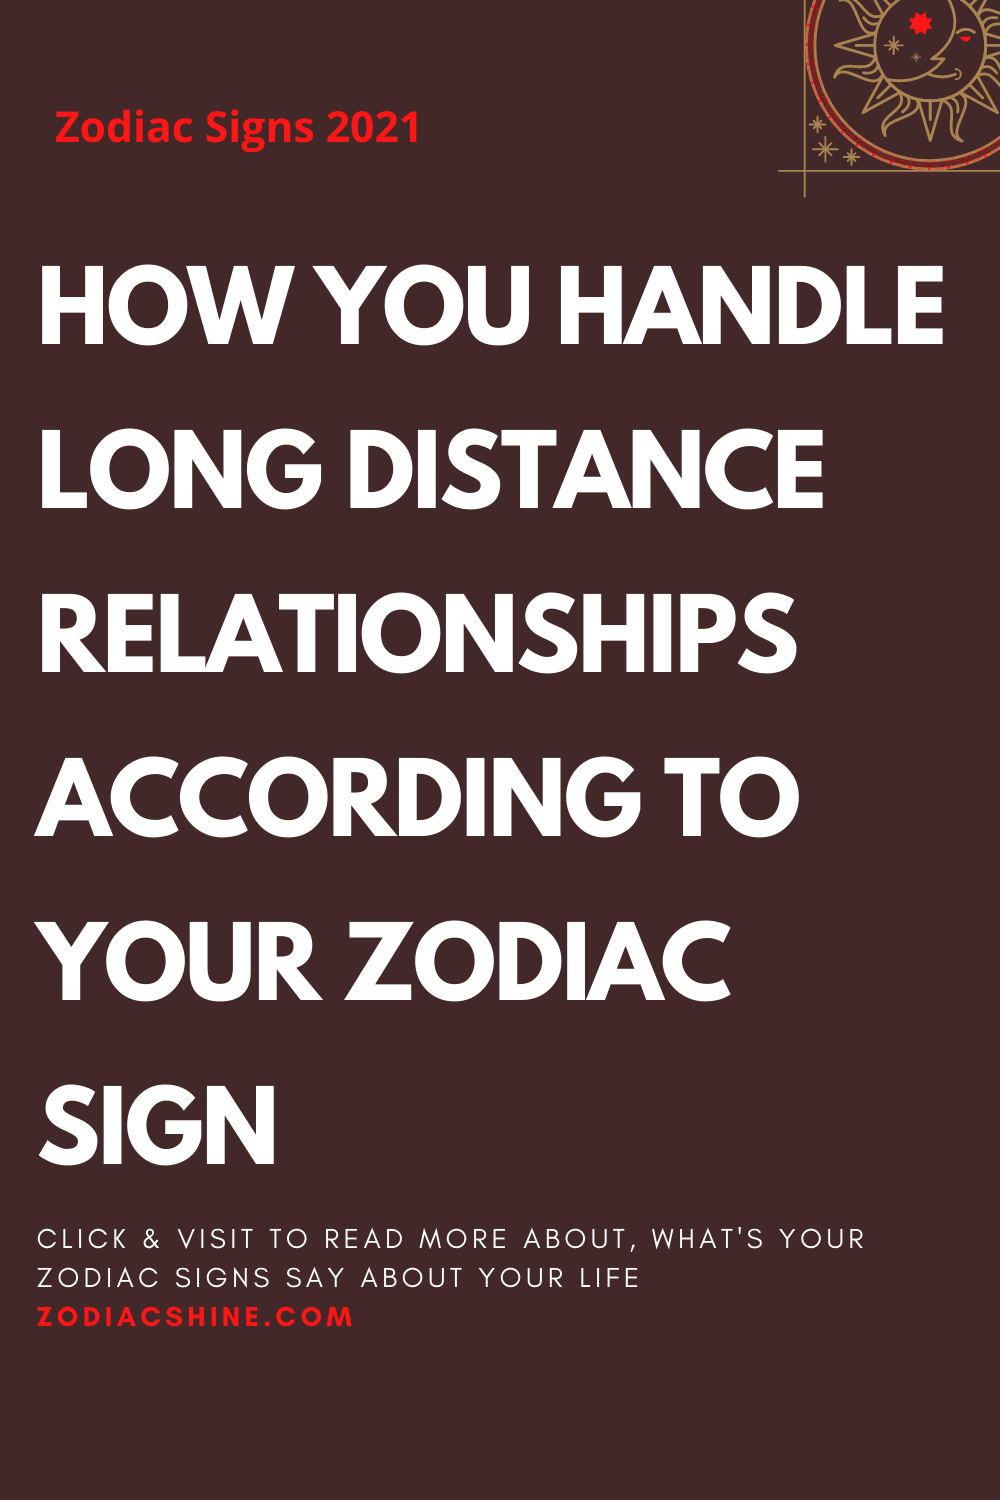 HOW YOU HANDLE LONG DISTANCE RELATIONSHIPS ACCORDING TO YOUR ZODIAC SIGN